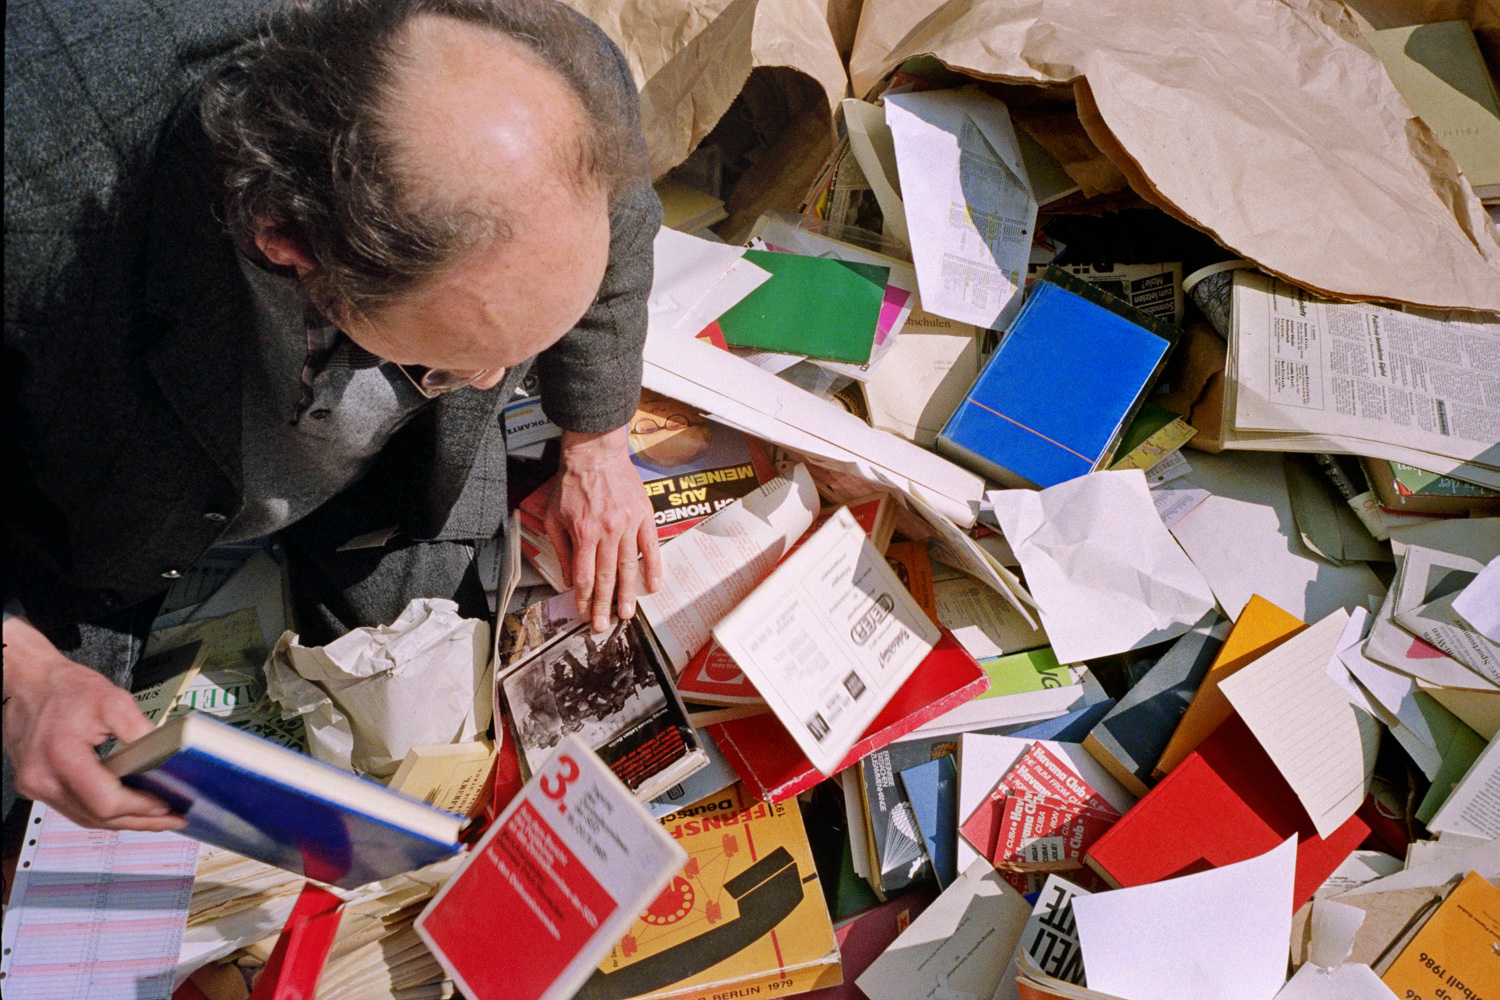  My friend David was a "junk remover" permitted onto the Stasi headquarters at 15 Normanenstrasse and I accompanied him as an assistant with a camera. This image shows David knee deep in a dumpster full of bureaucratic junk, forms, photographs and a 